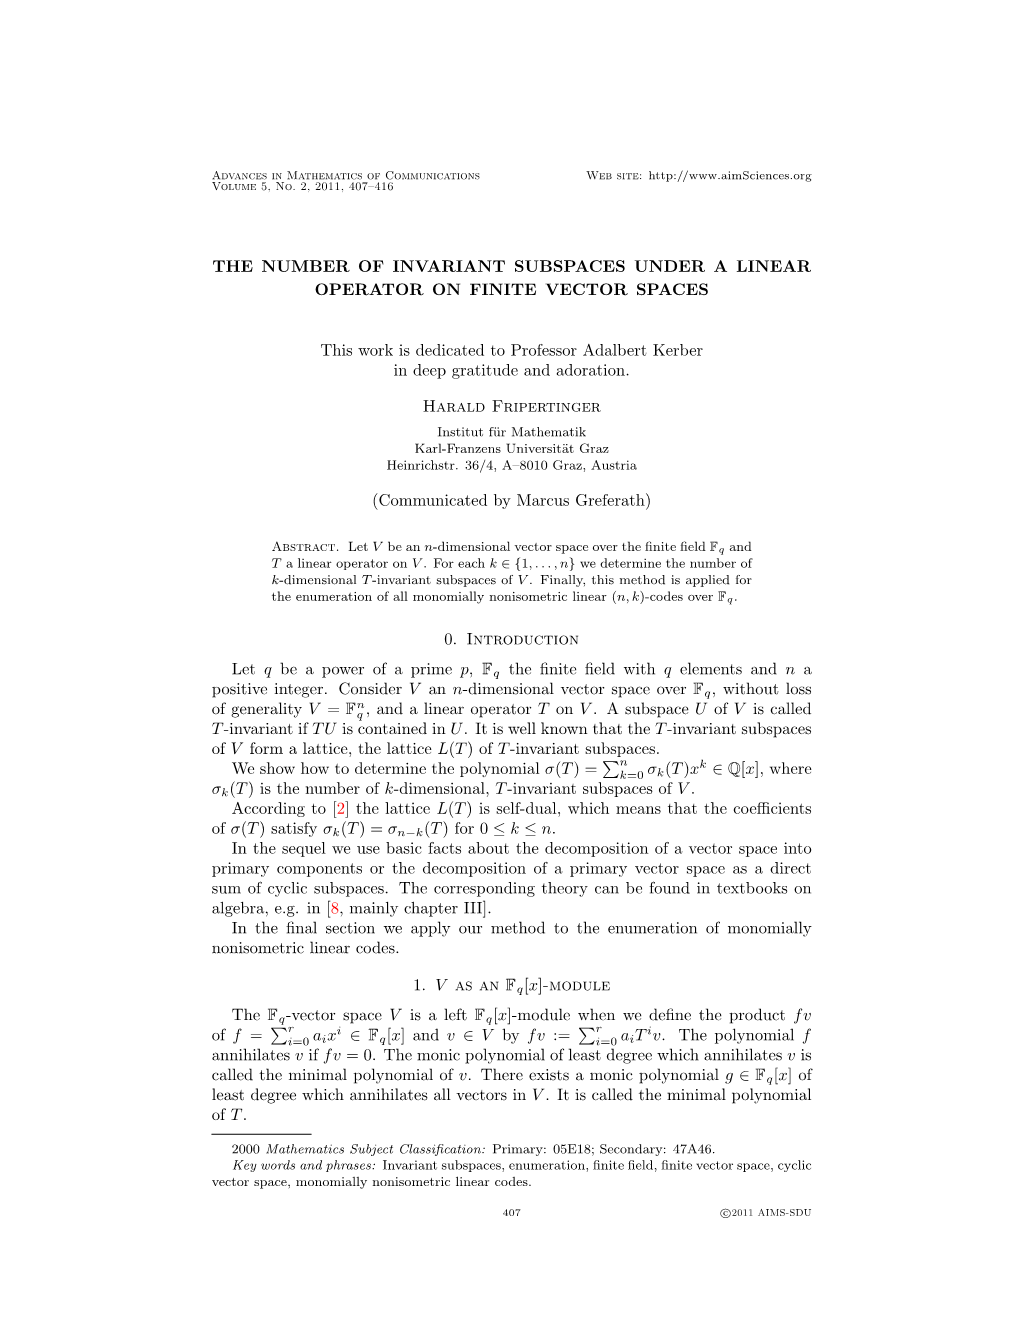 The Number of Invariant Subspaces Under a Linear Operator on Finite Vector Spaces